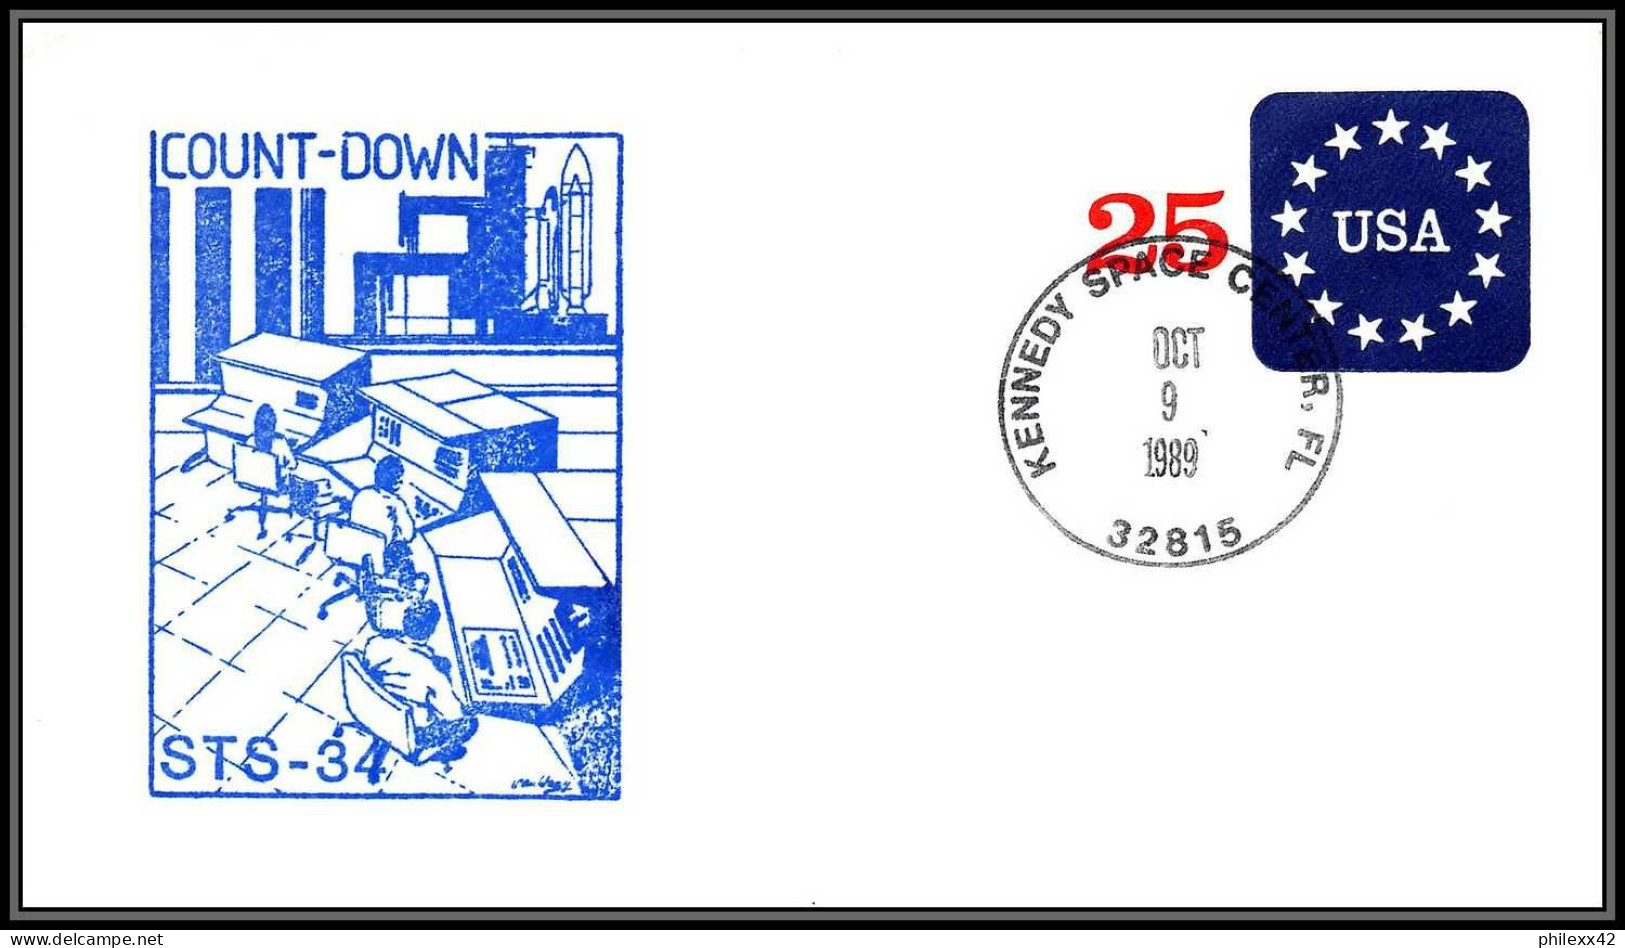 1814 Espace (space) Entier Postal (Stamped Stationery) USA STS 34 Count Down Atlantis Navette Shuttle - 9/10/1989 - United States